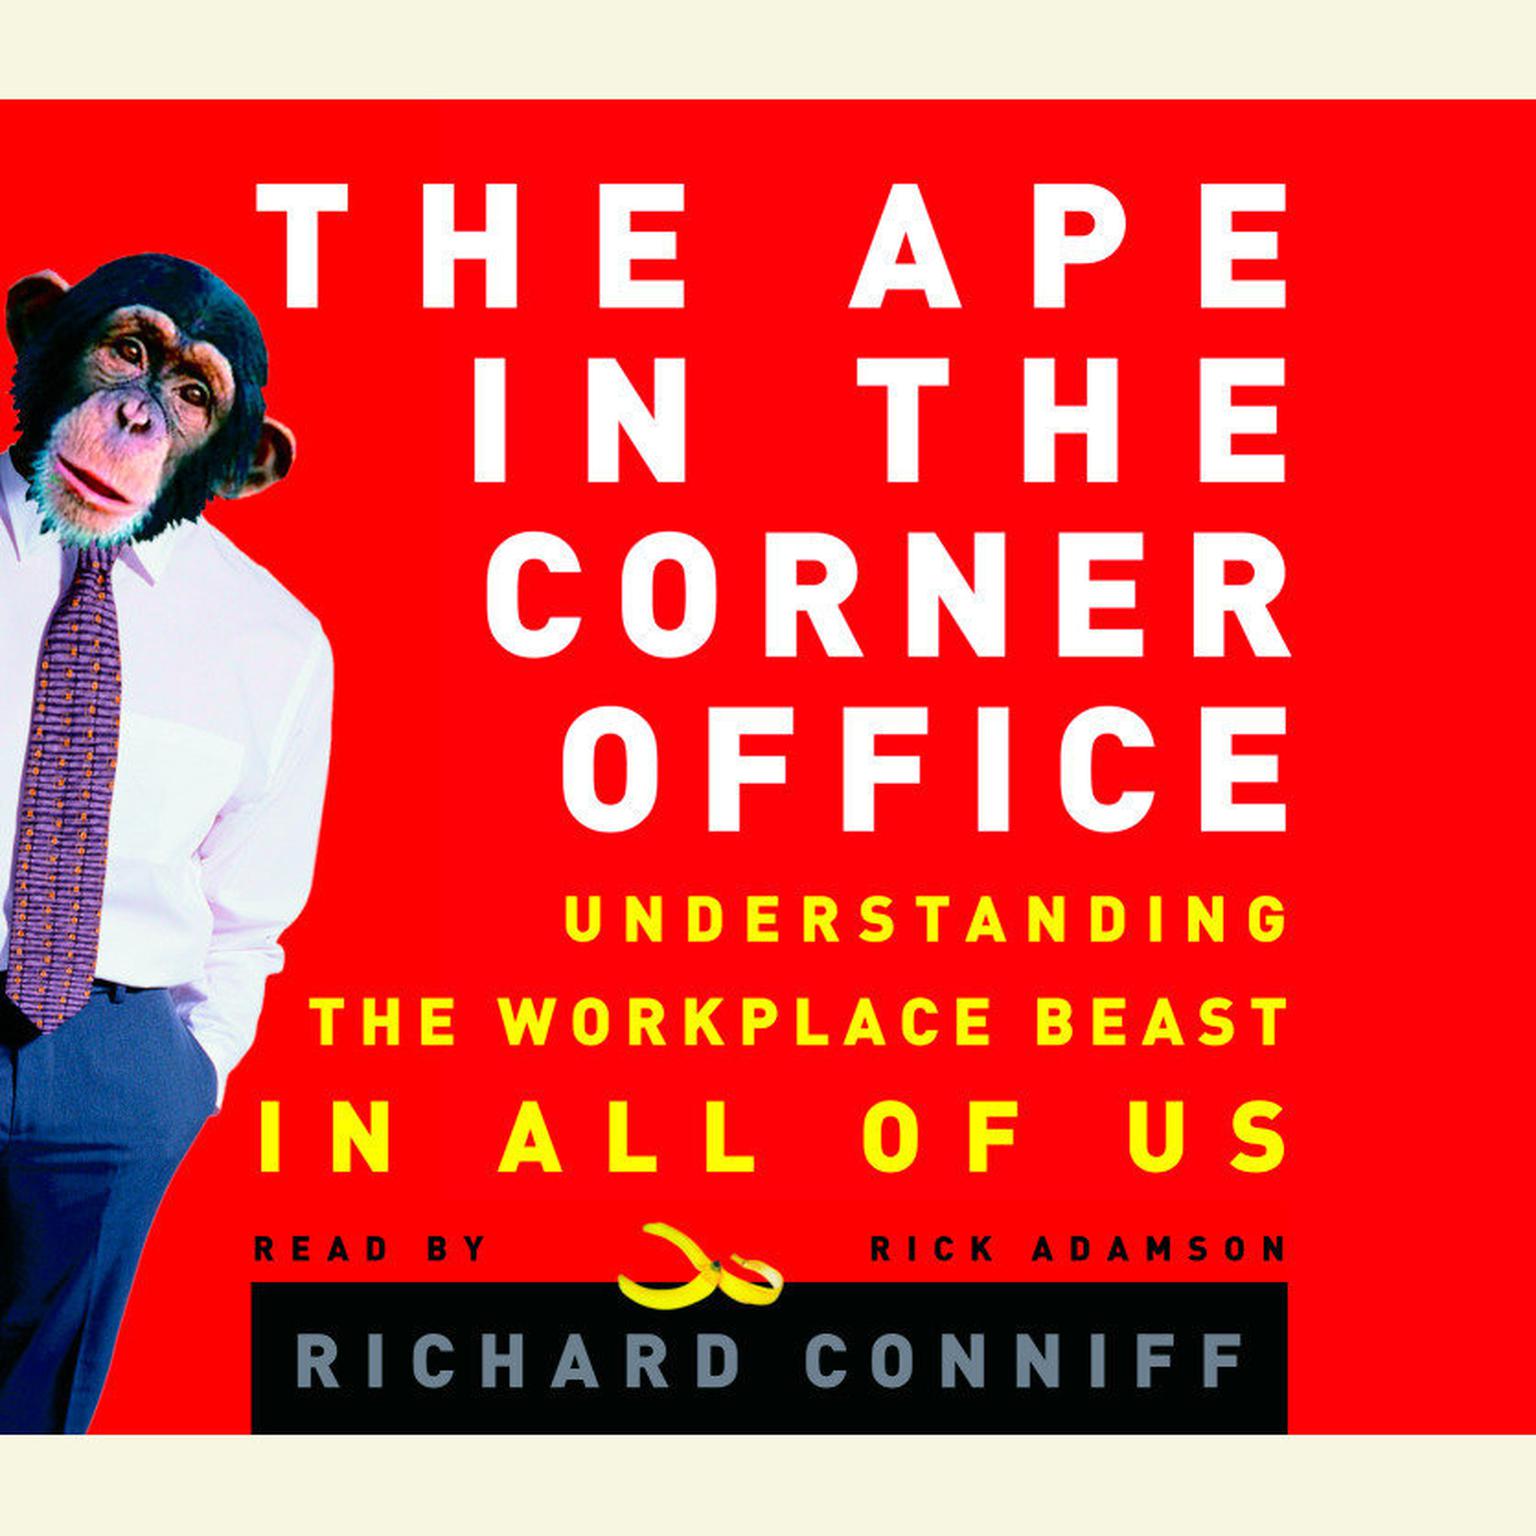 The Ape in the Corner Office (Abridged): How to Make Friends, Win Fights and Work Smarter by Understanding Human Nature Audiobook, by Richard Conniff